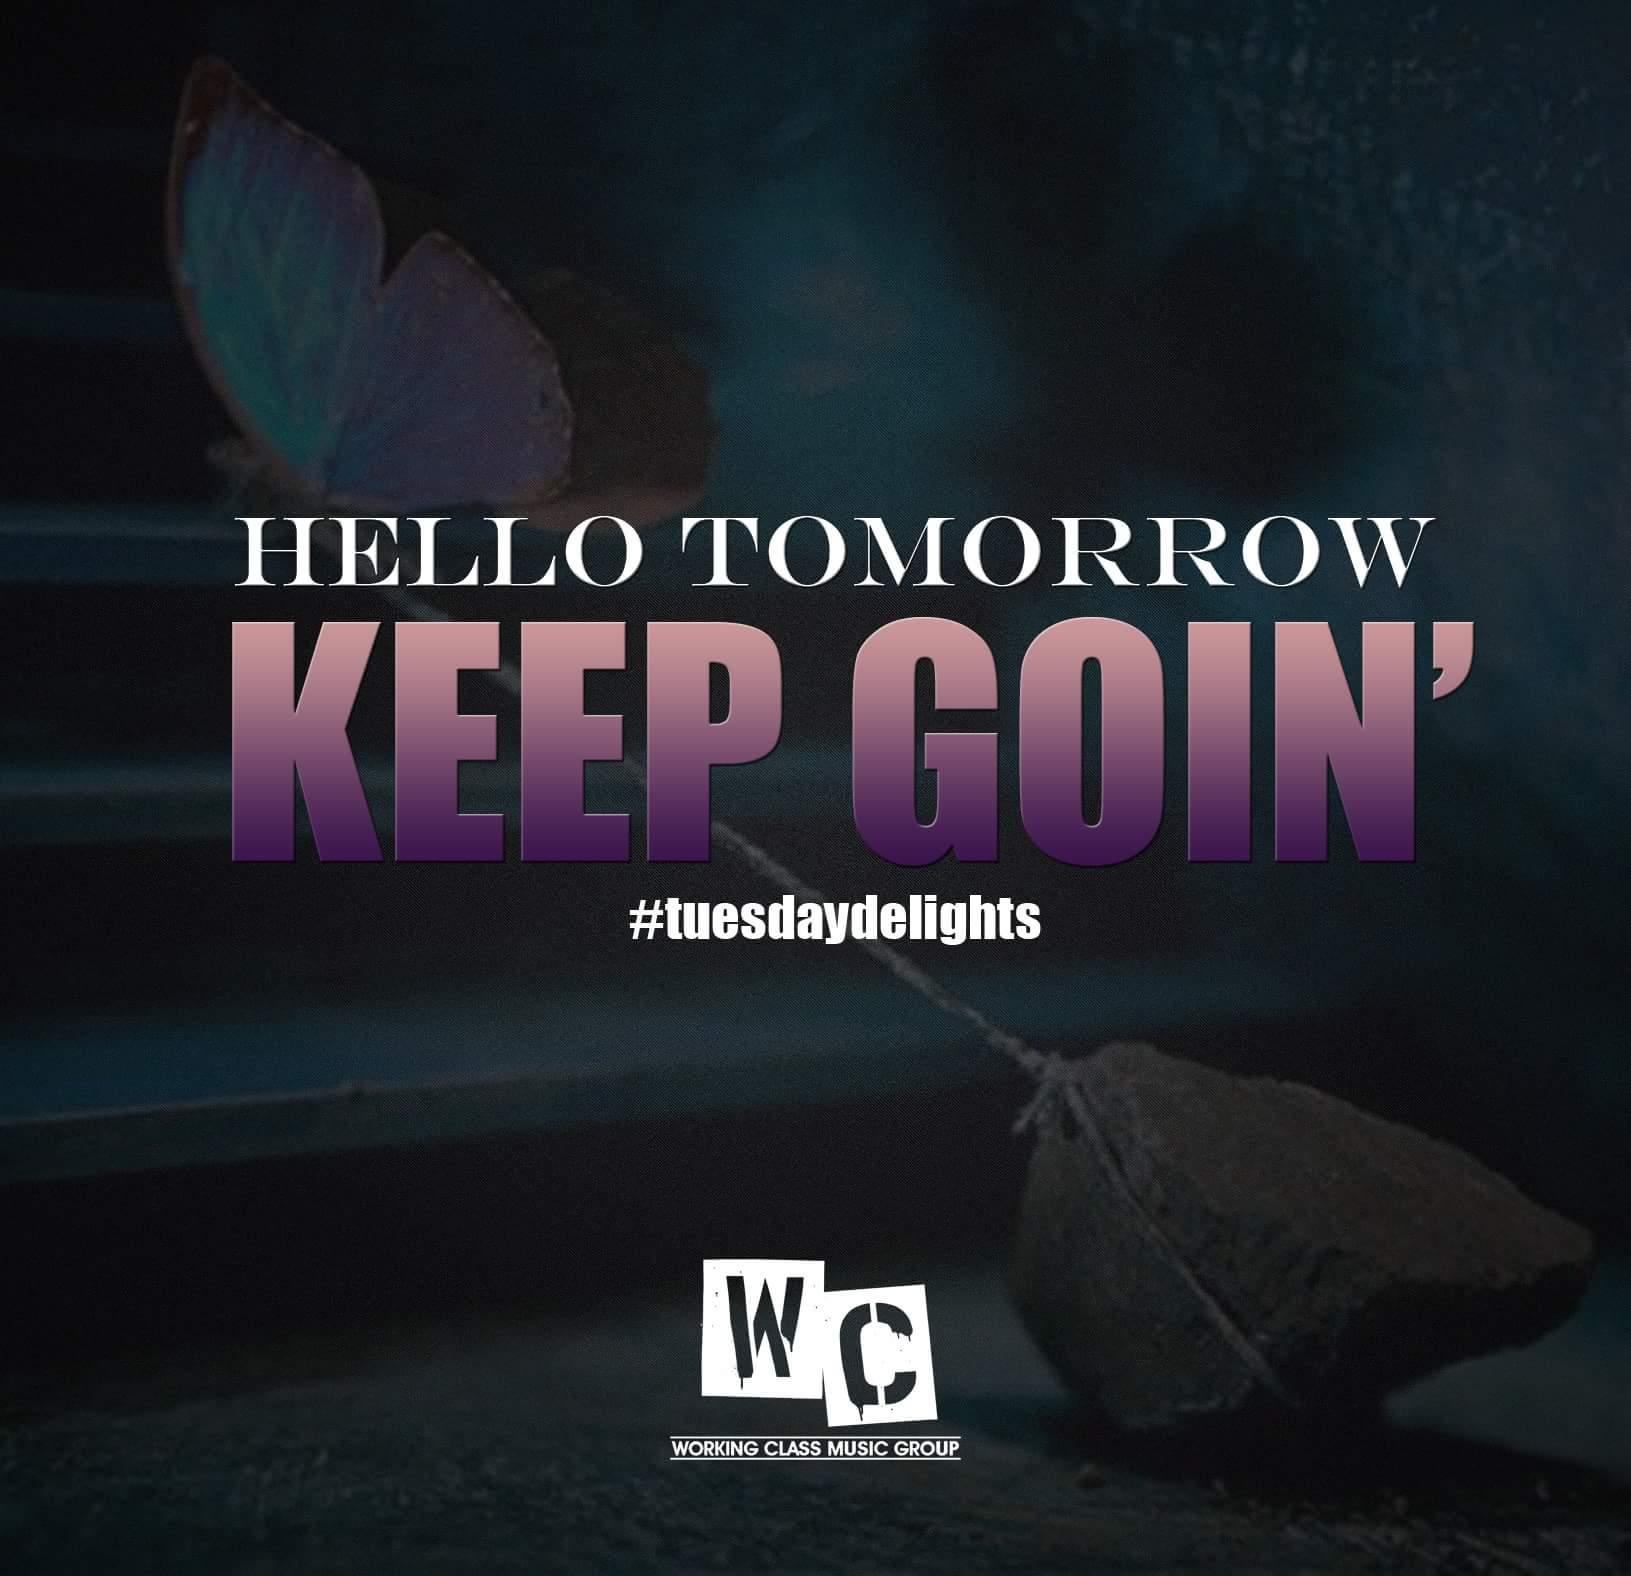 Hello Tomorrow “Keeps Goin'” In Their New Single